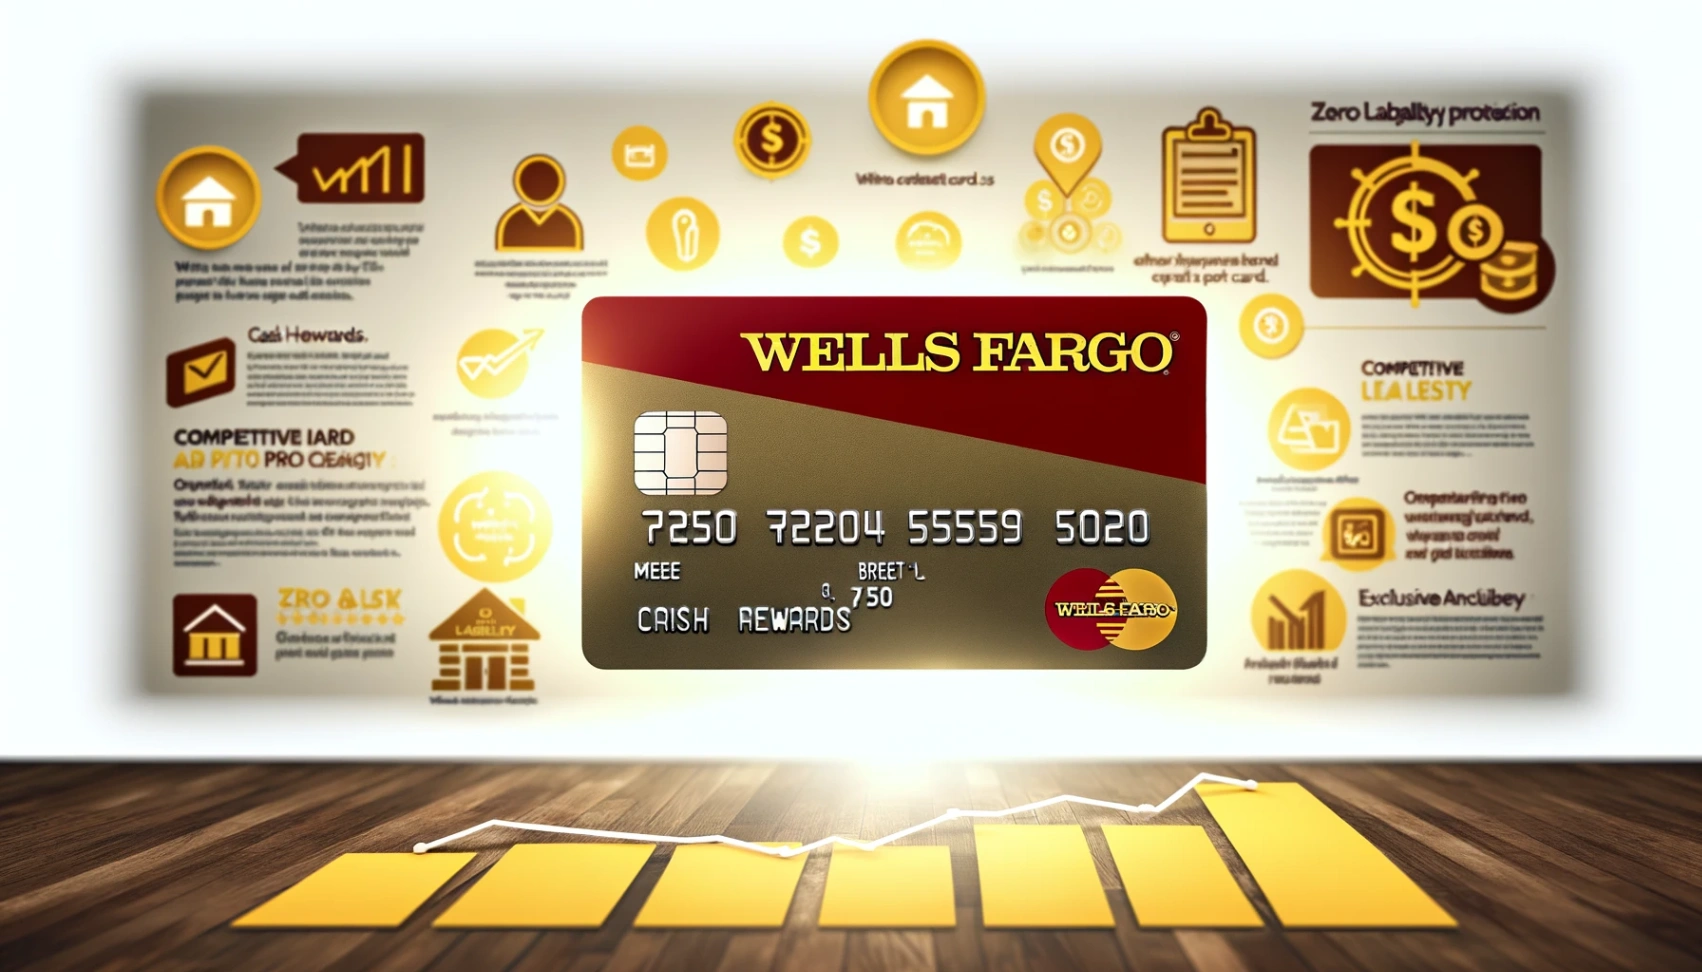 Wells Fargo Credit Cards: How to Order Using a Cell Phone